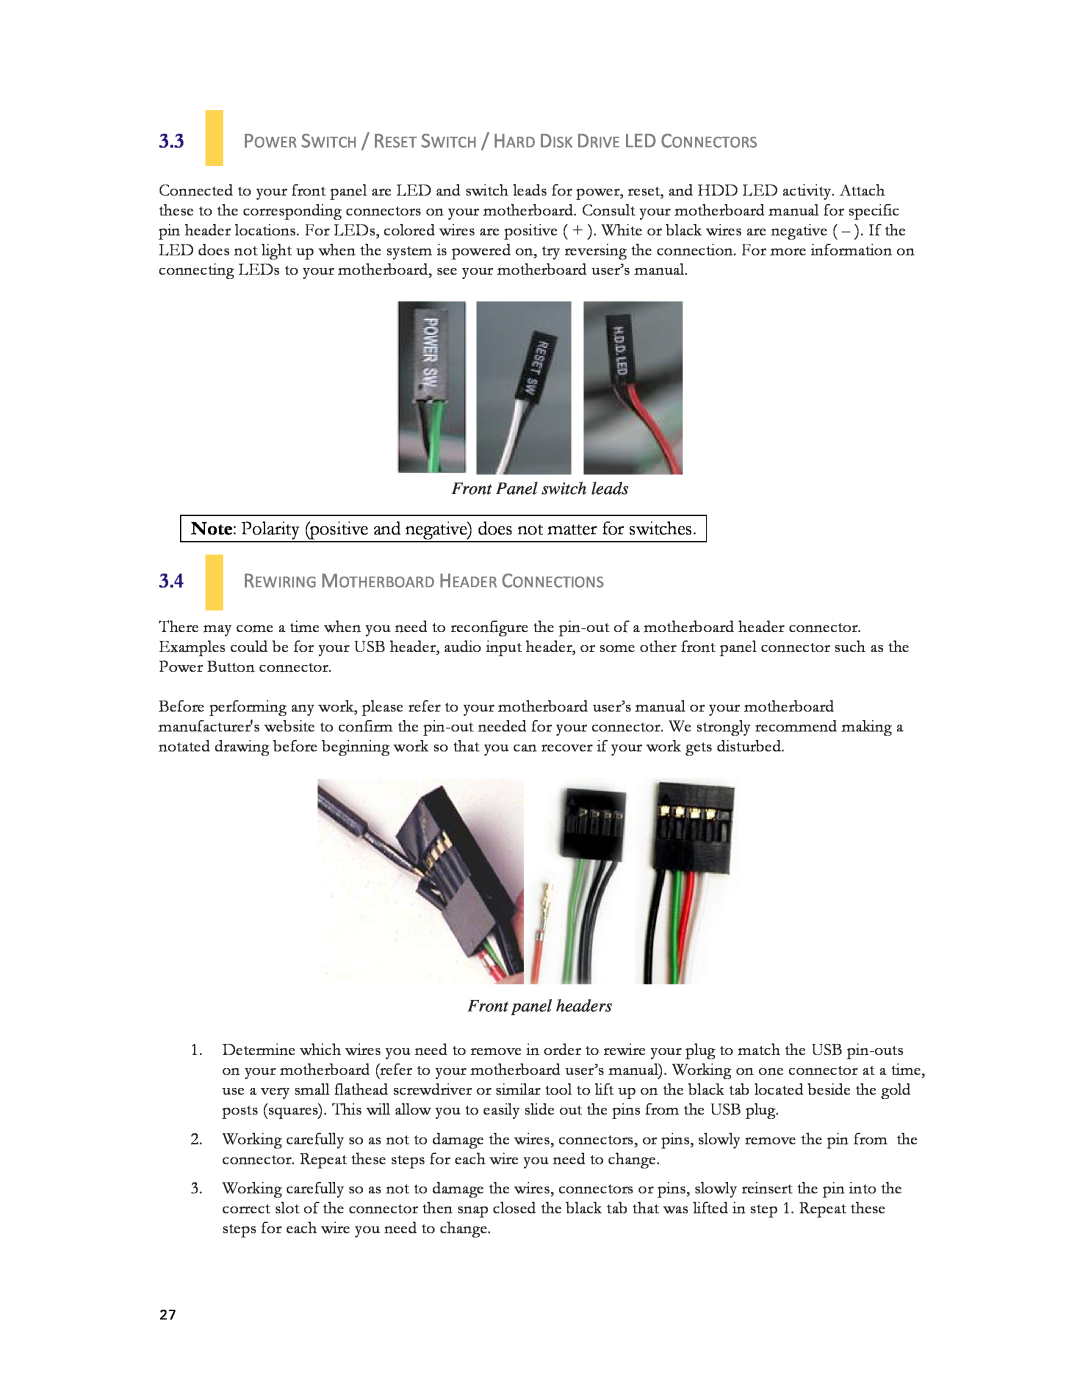 Antec DF-35 user manual Note Polarity positive and negative does not matter for switches, Front Panel switch leads 